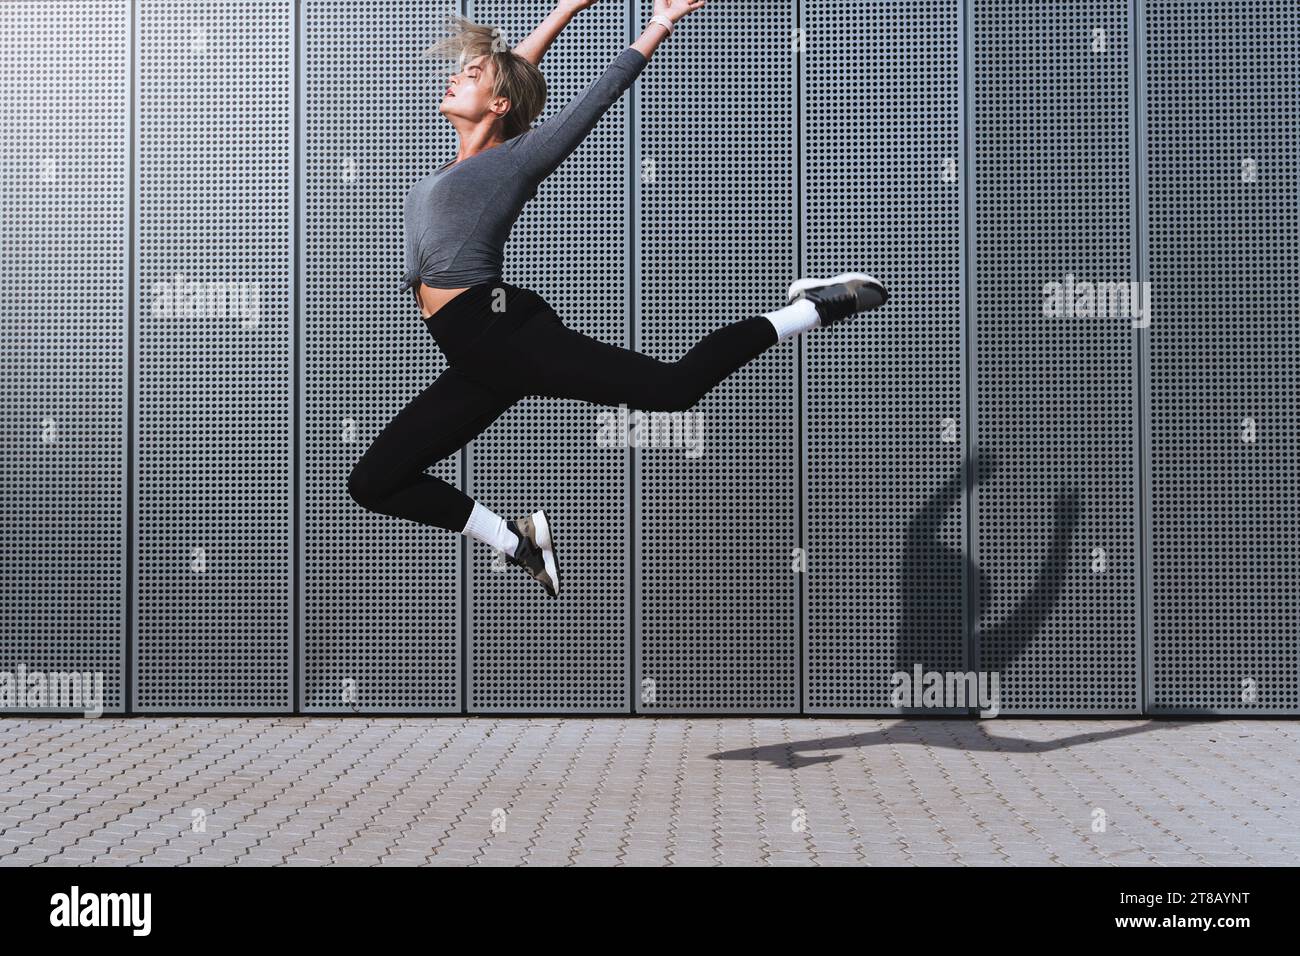 Woman dancer wearing female sportswear performing against background with modern steel panels Stock Photo